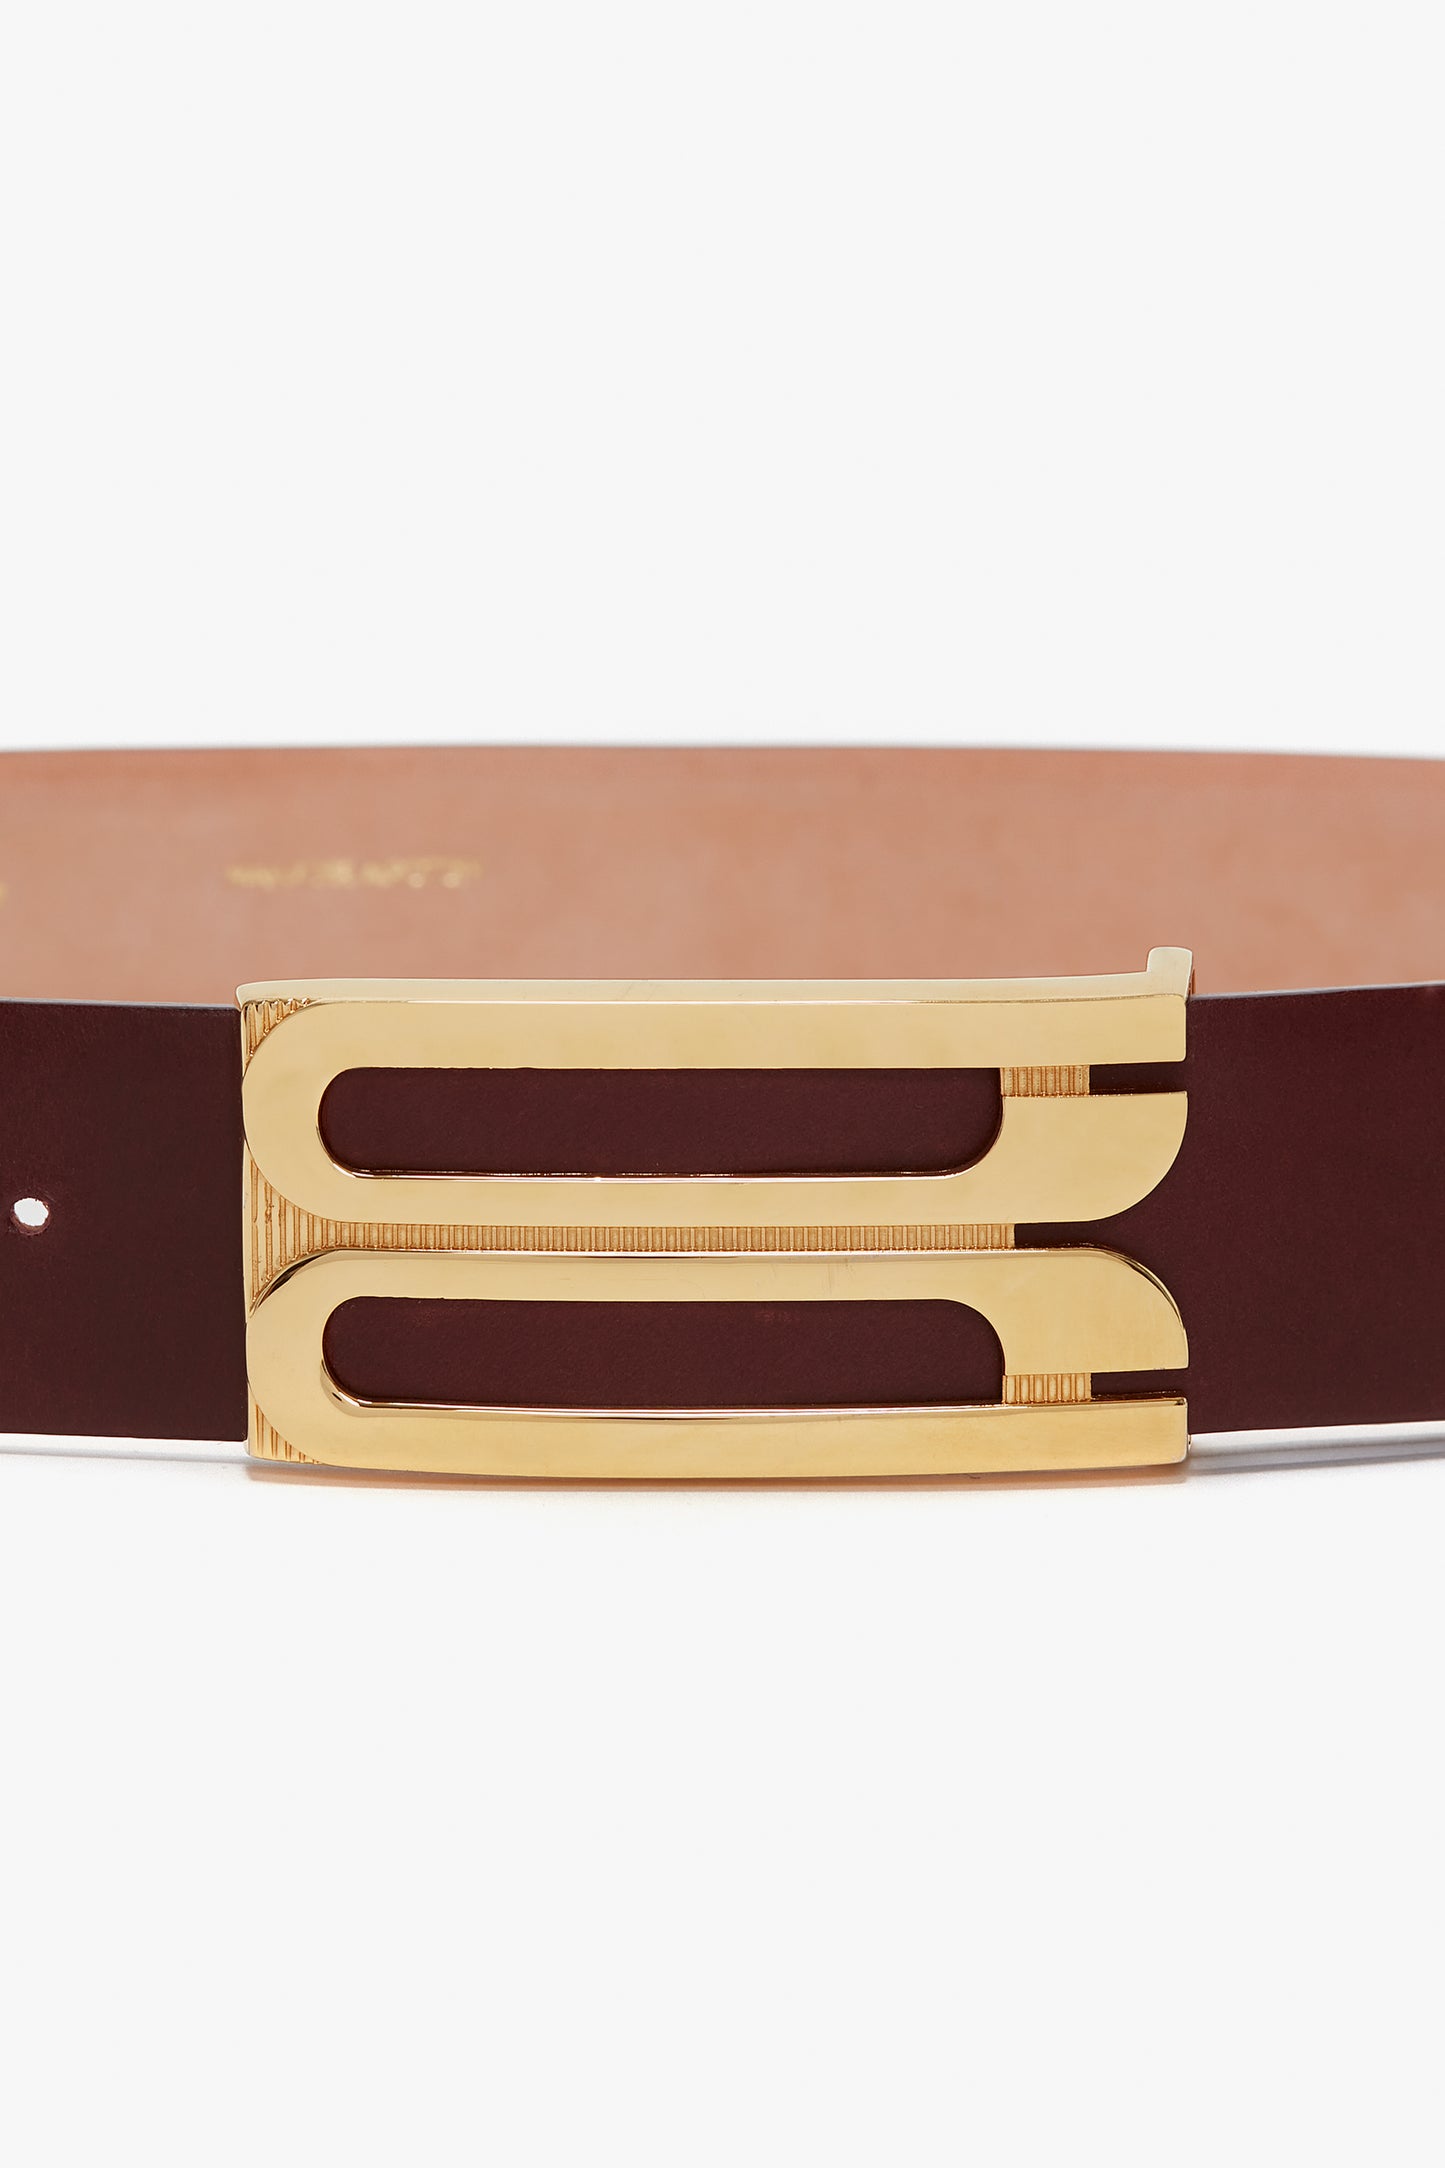 A contemporary brown calf leather belt with a gold rectangular buckle featuring two parallel cut-out slots is replaced by the Jumbo Frame Belt In Burgundy Leather from Victoria Beckham.